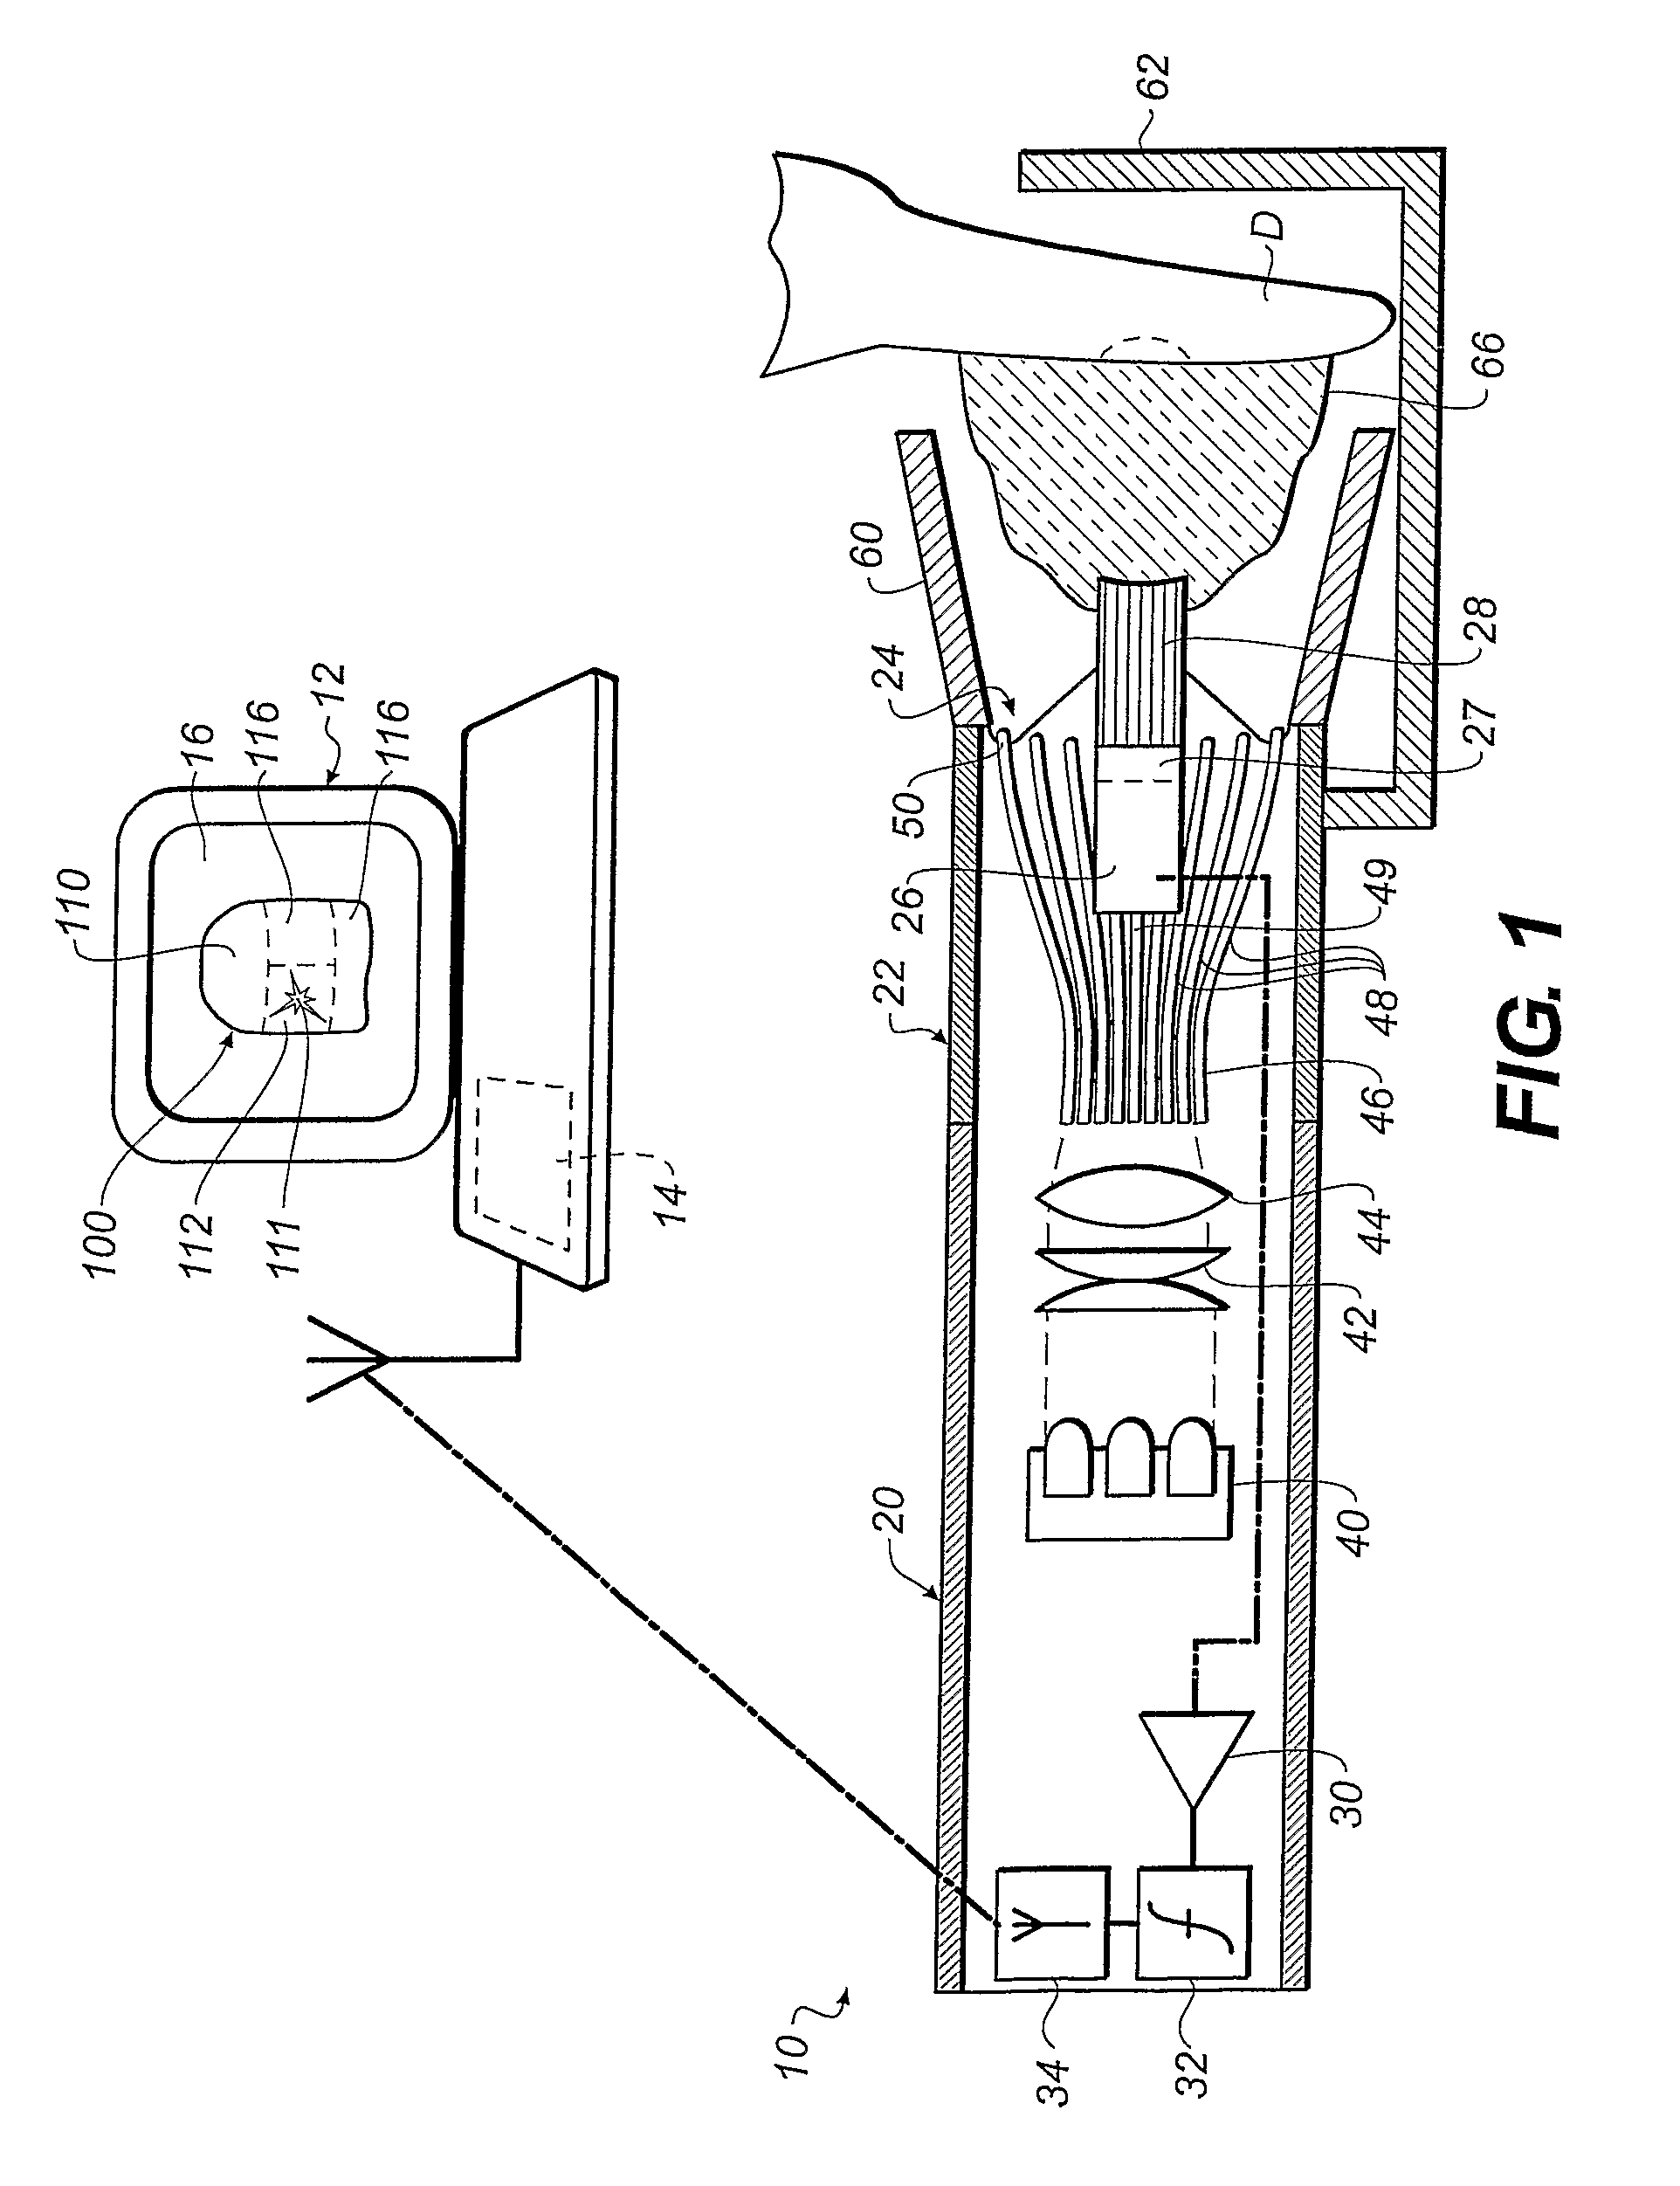 Equipment and method for measuring dental shade